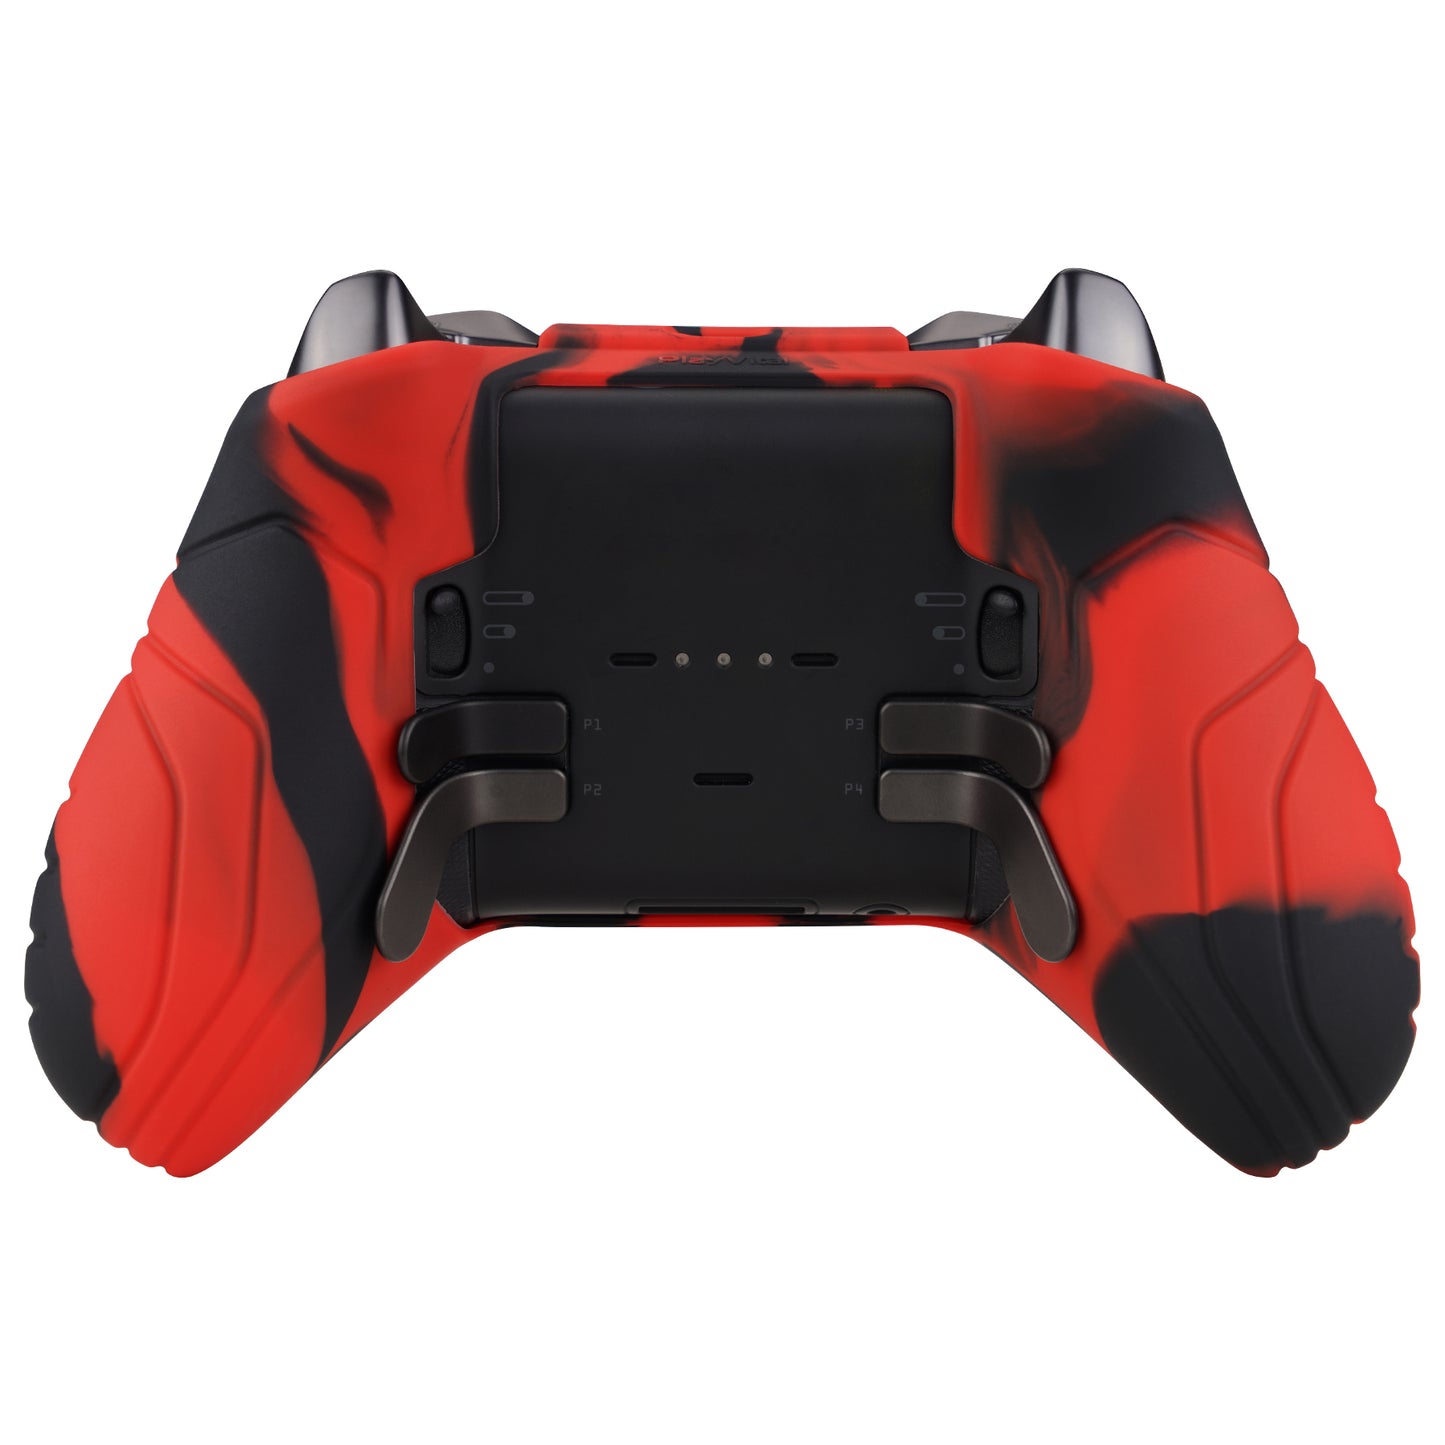 PlayVital Samurai Edition Anti Slip Silicone Case Cover for Xbox Elite Wireless Controller Series 2, Ergonomic Soft Rubber Skin Protector for Xbox Elite Series 2 with Thumb Grip Caps - Red & Black- XBE2M004 playvital